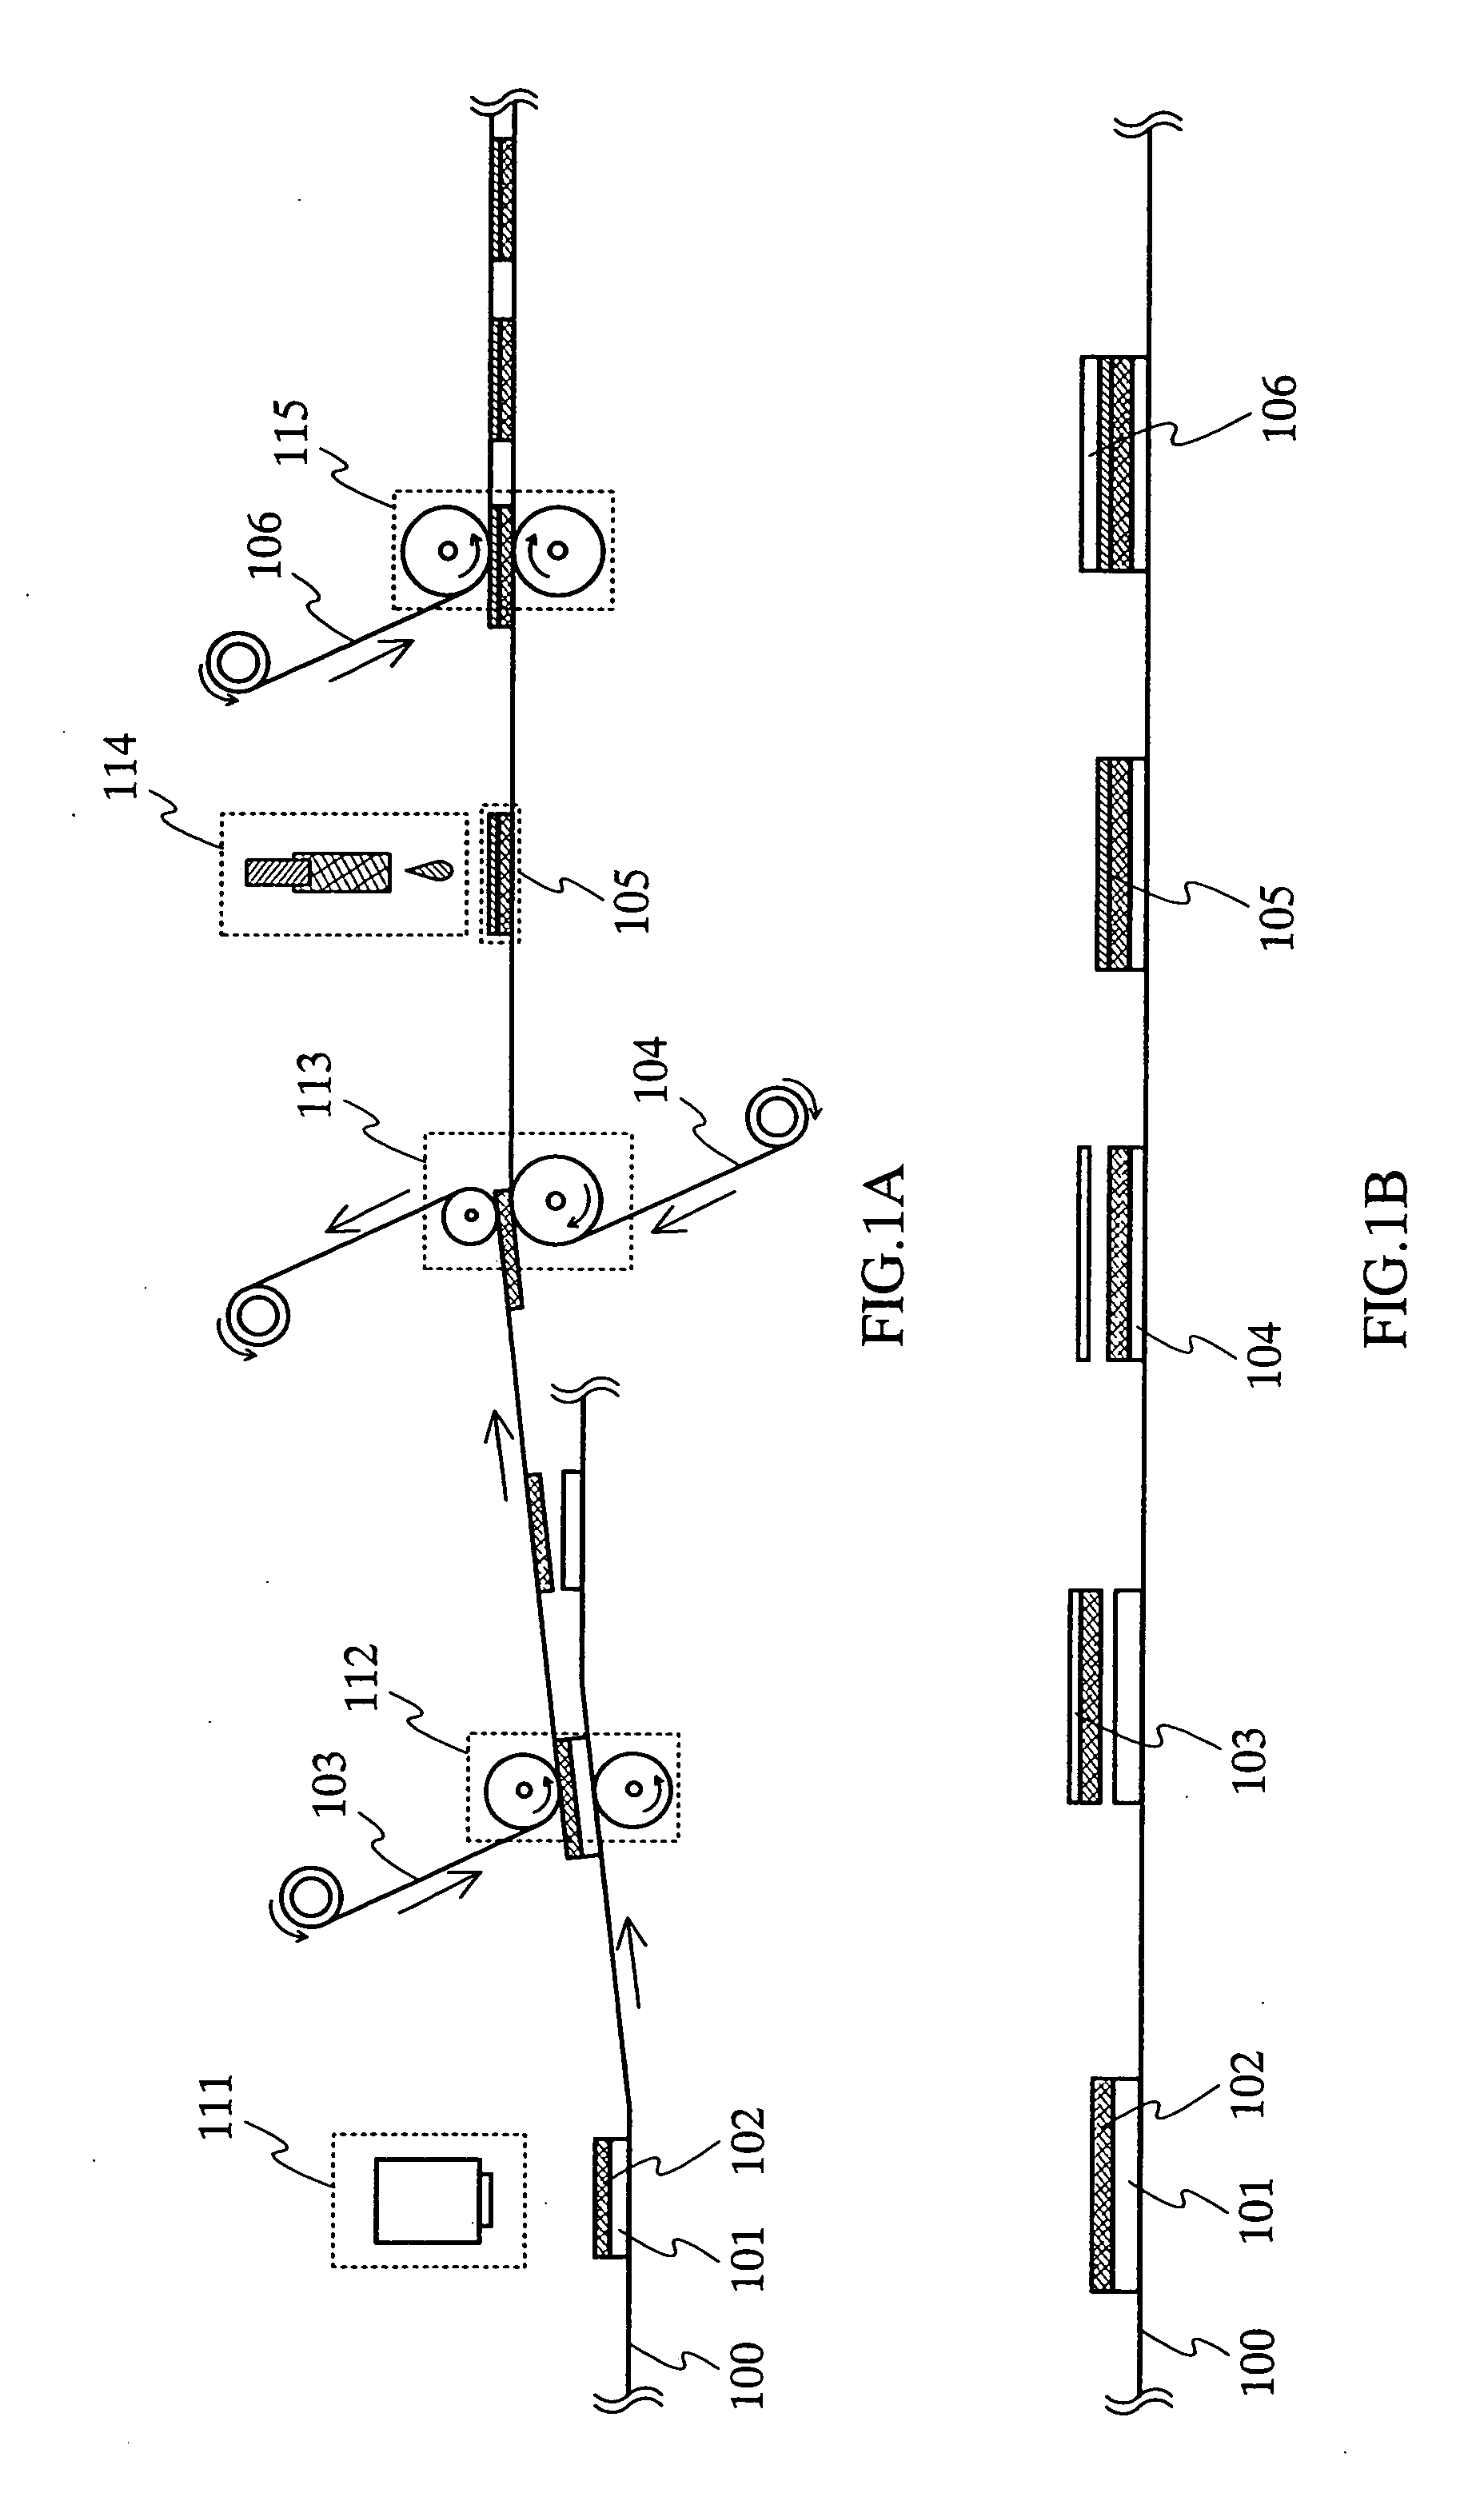 Display device, method for manufacturing the same and apparatus for manufacturing the same